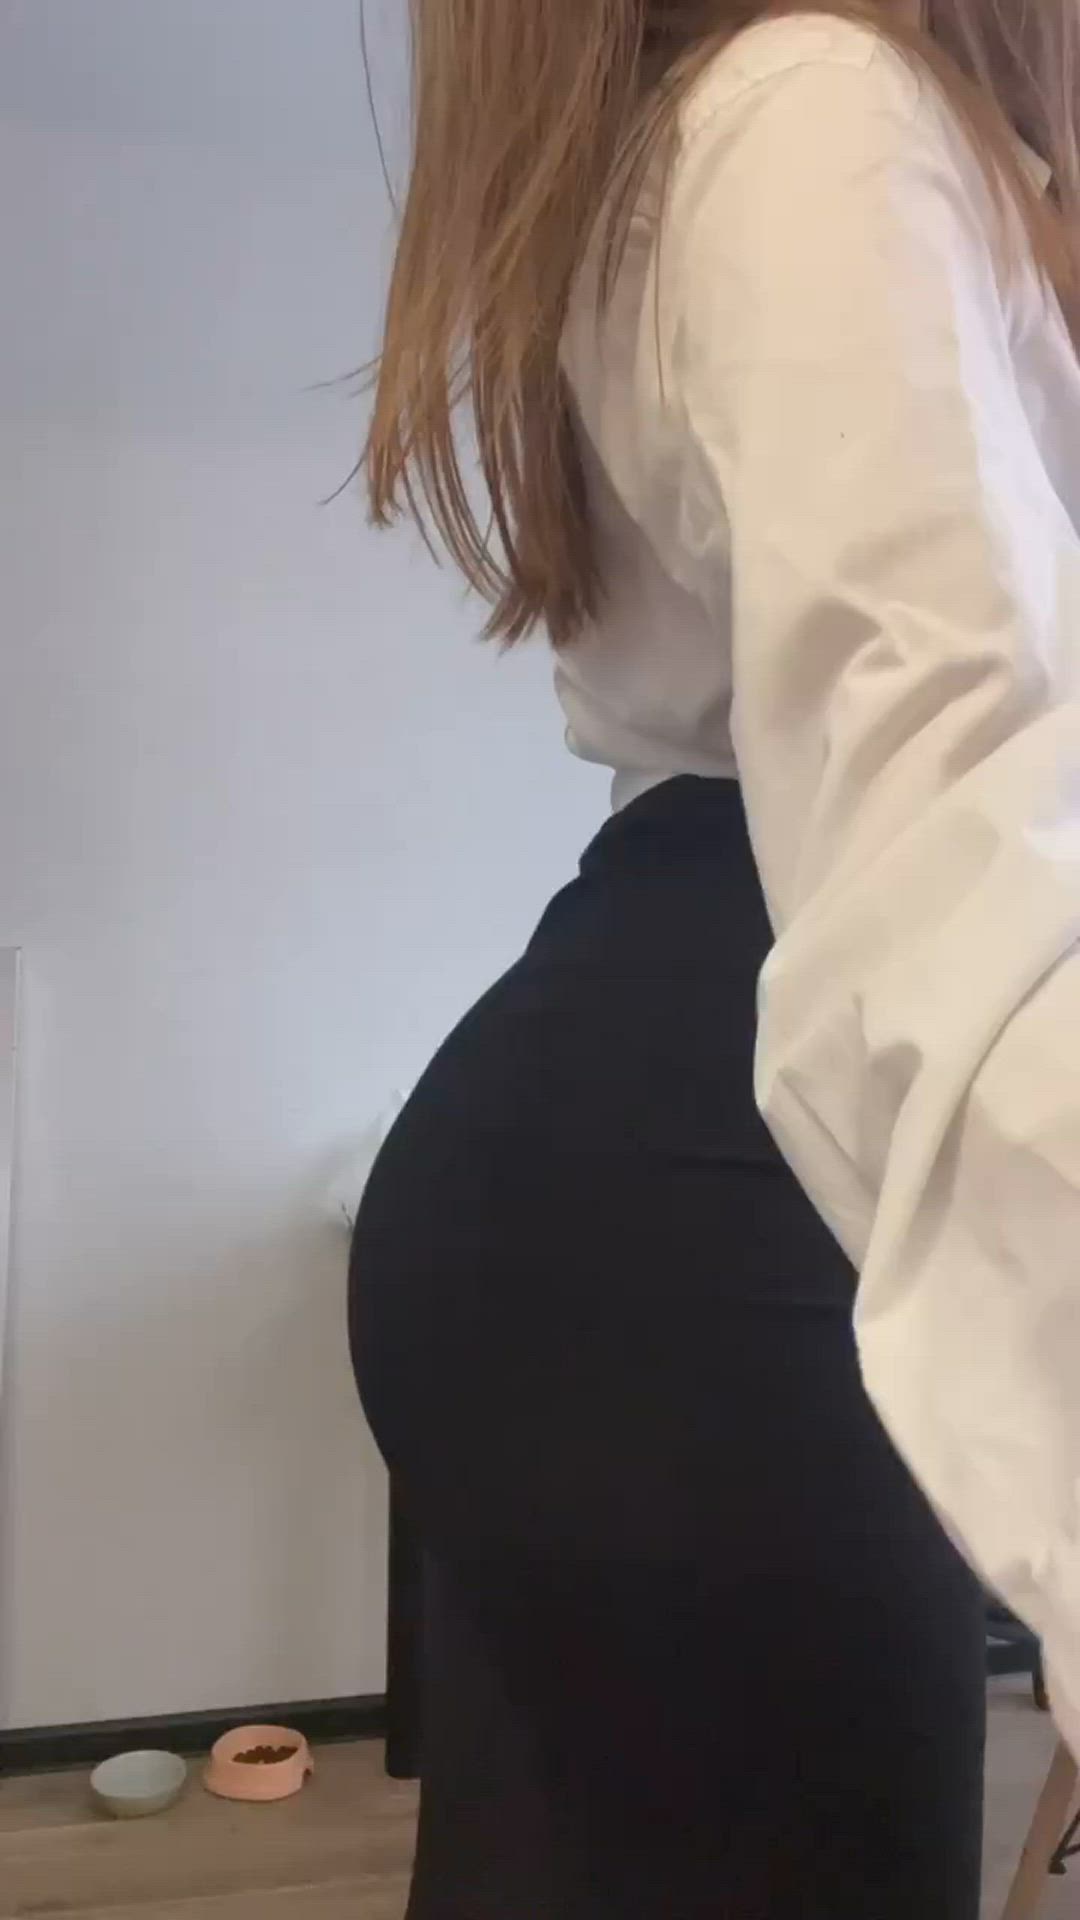 Ass porn video with onlyfans model ameliauk01 <strong>@amelia_uk</strong>